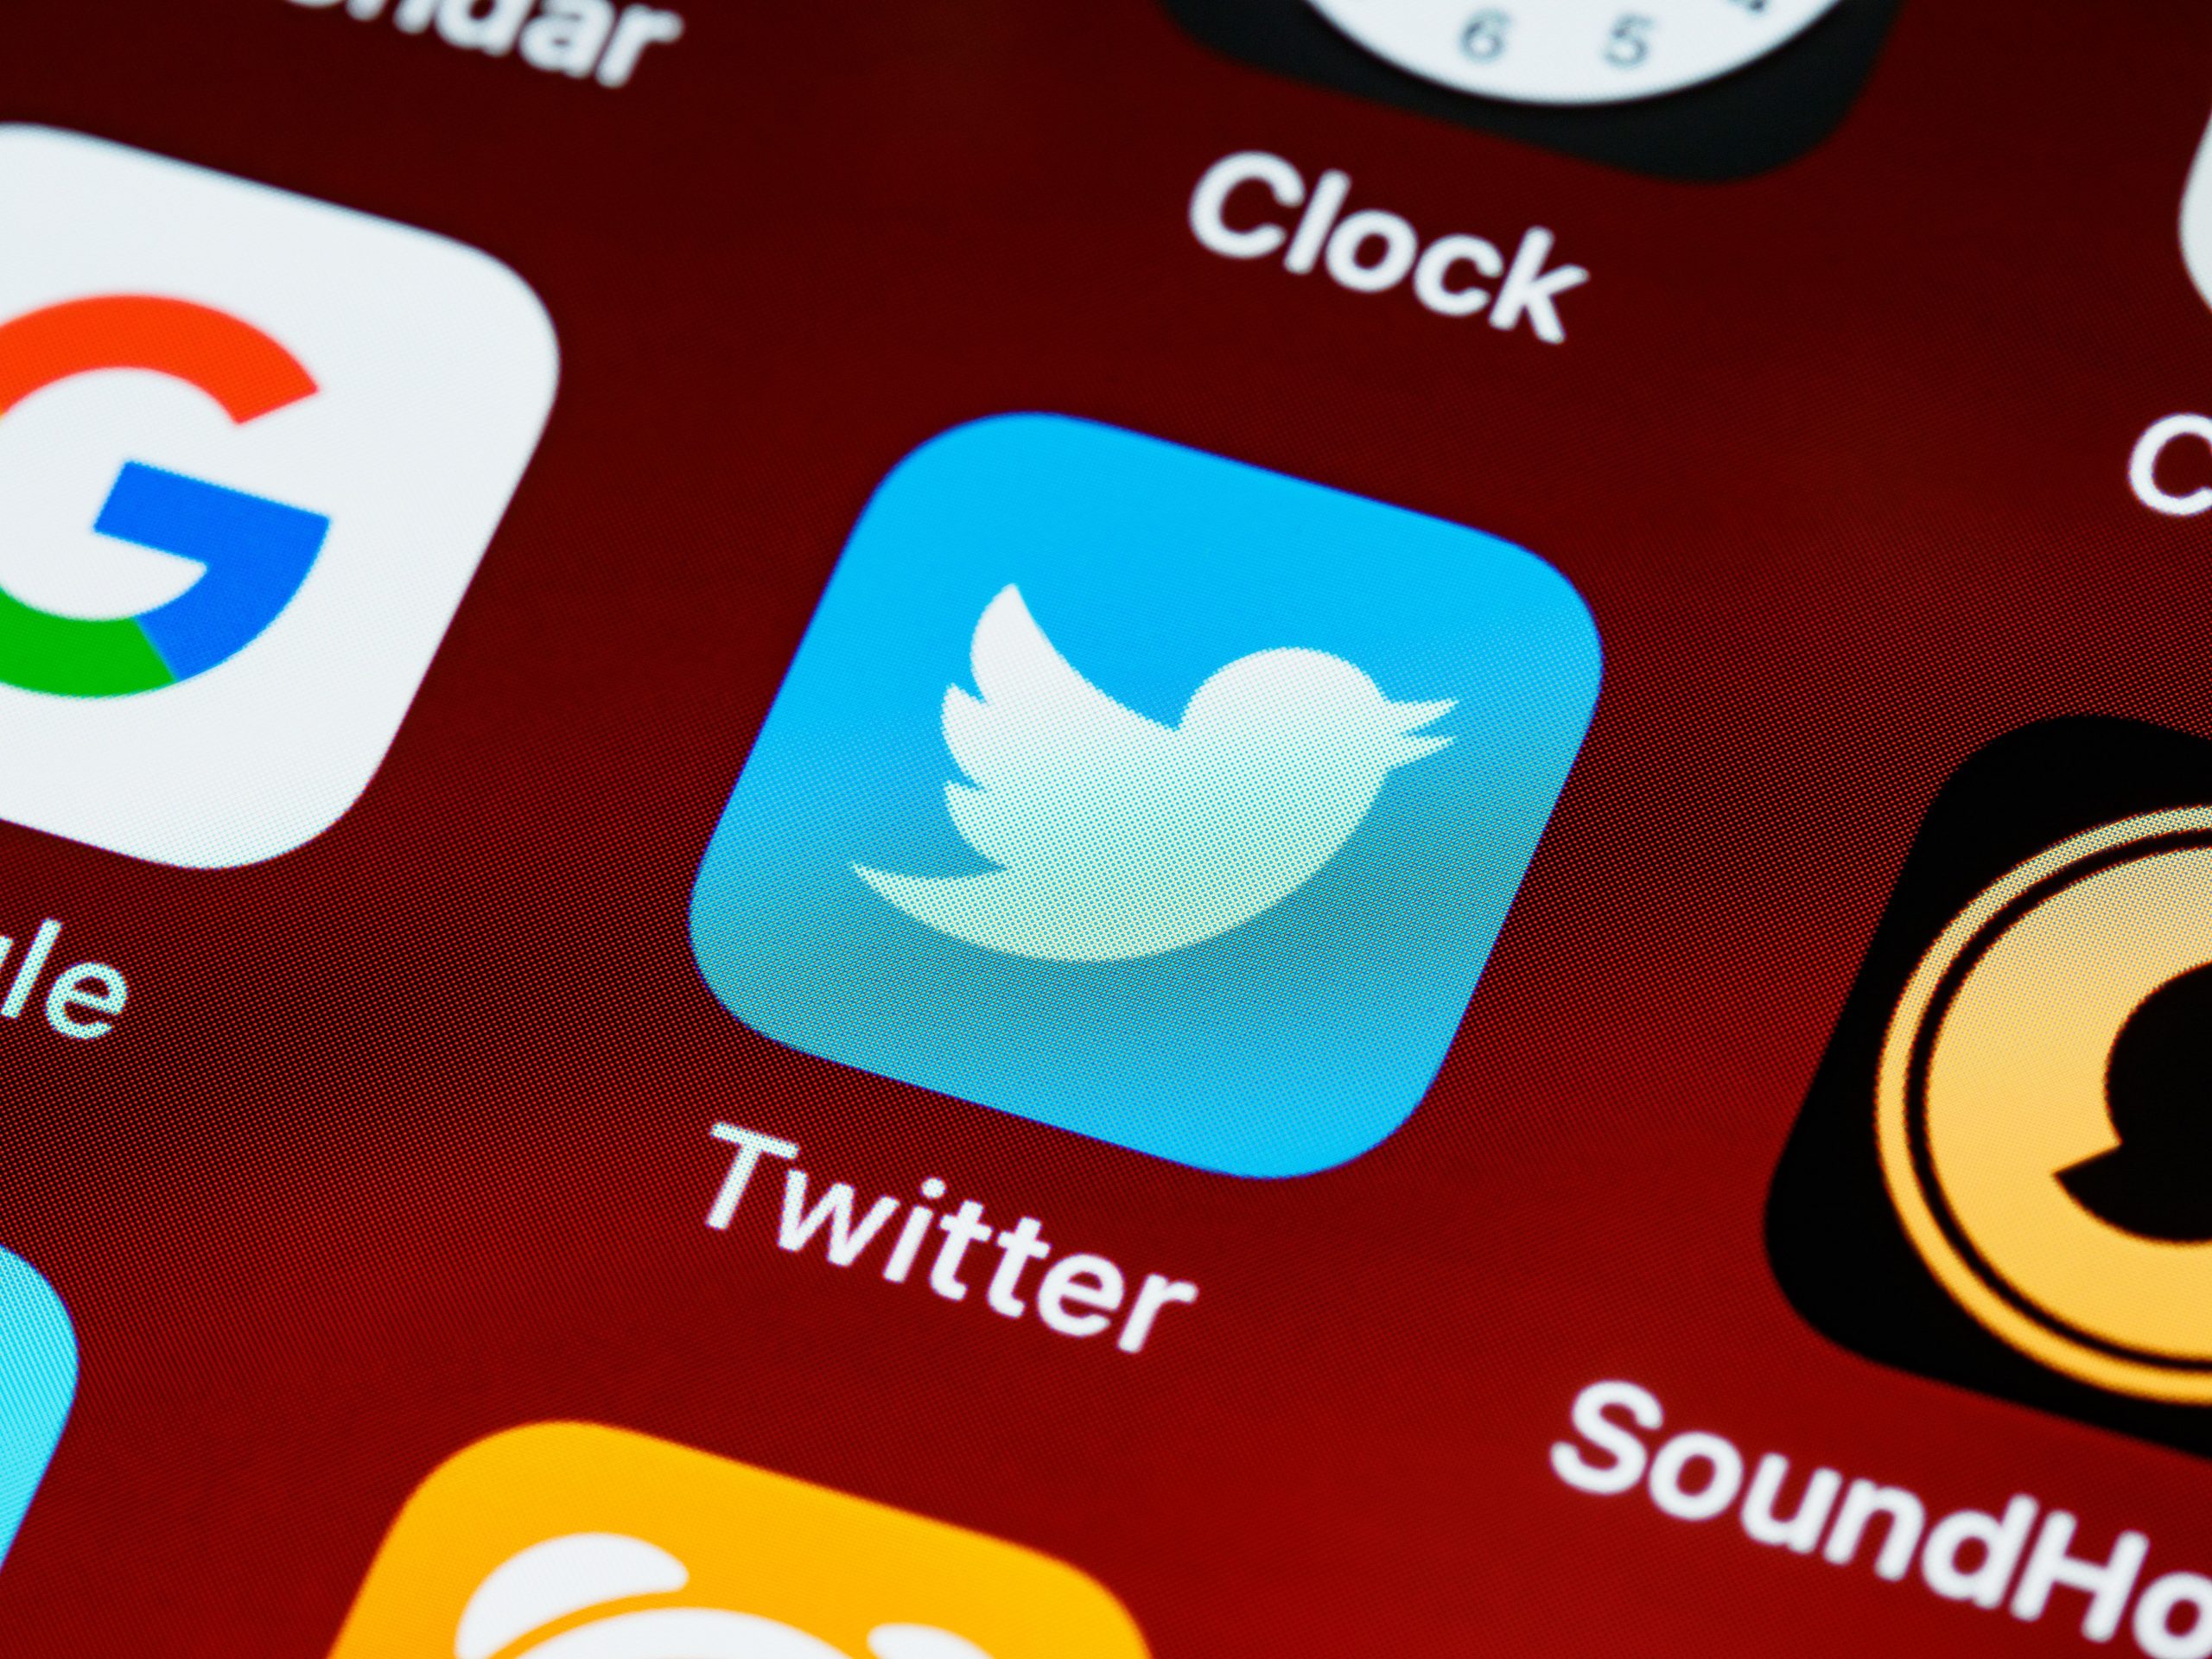 Twitter down: Outage reported by Downdetector